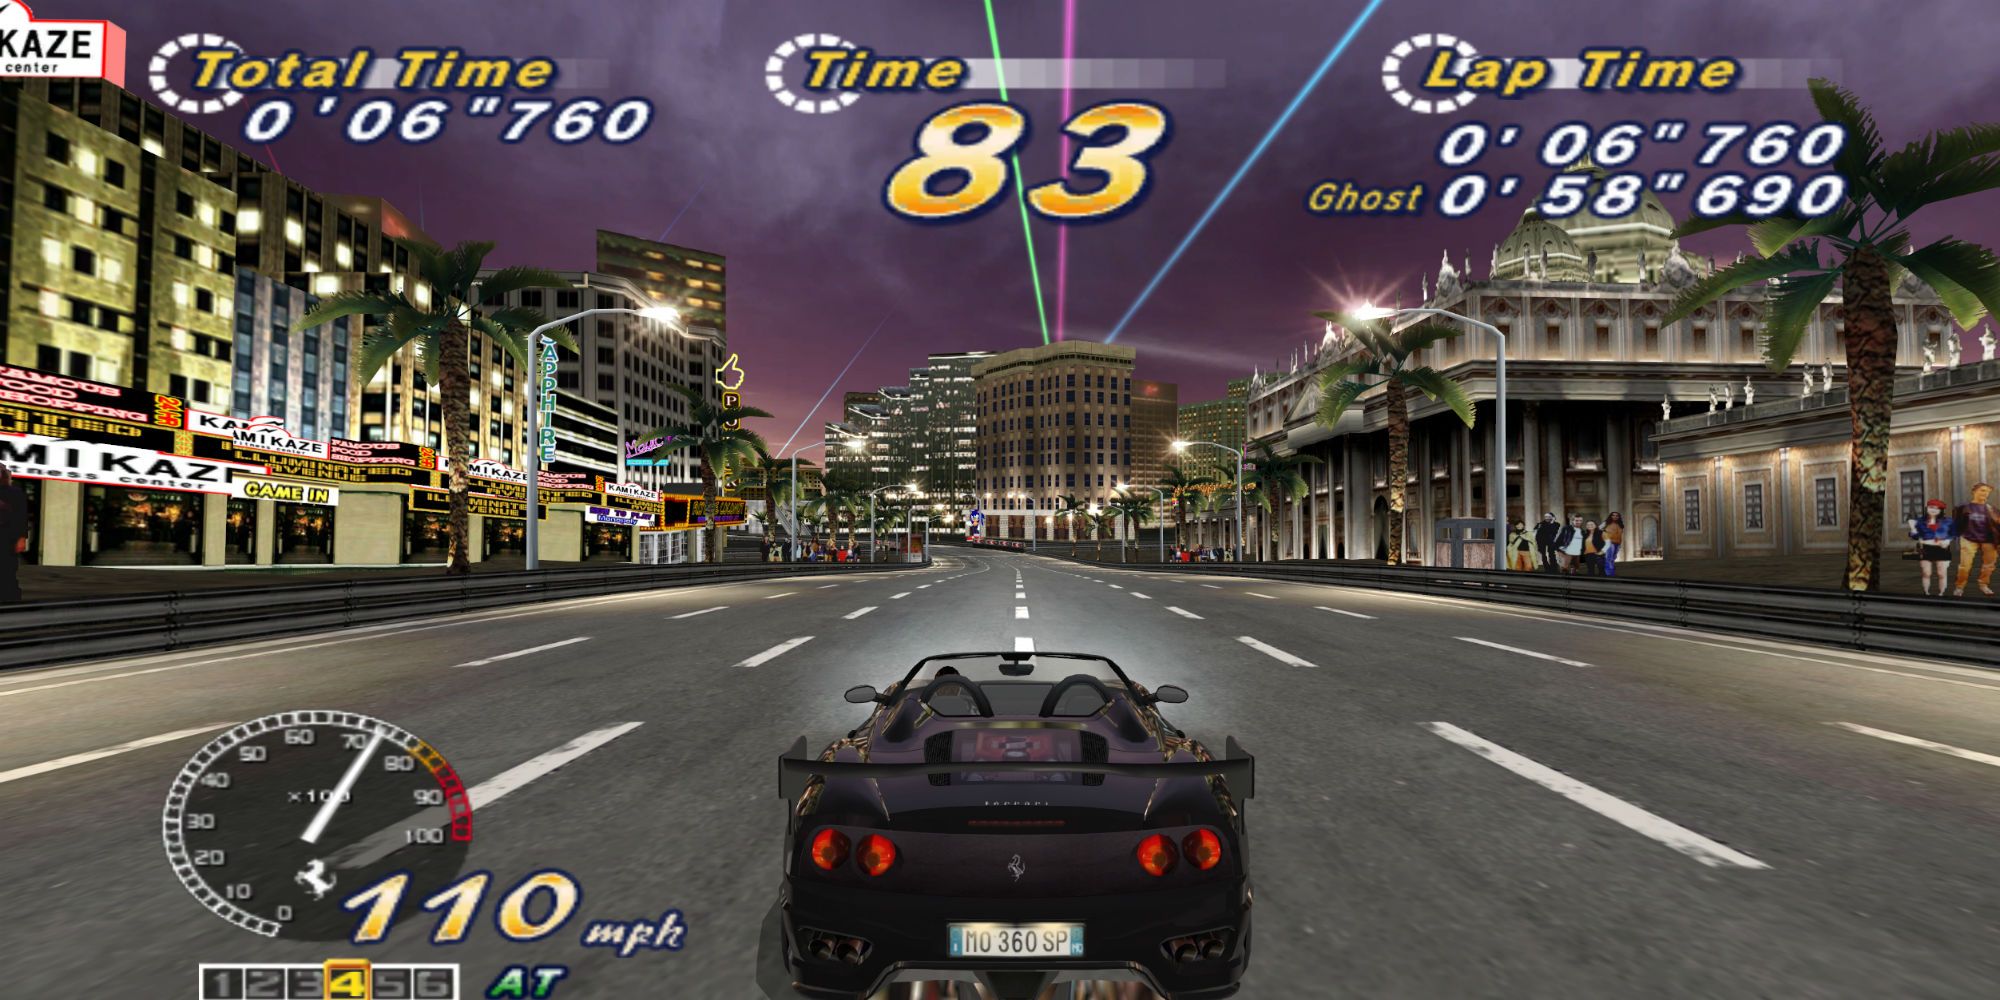 A convertible races at night in OutRun 2006 Coast 2 Coast